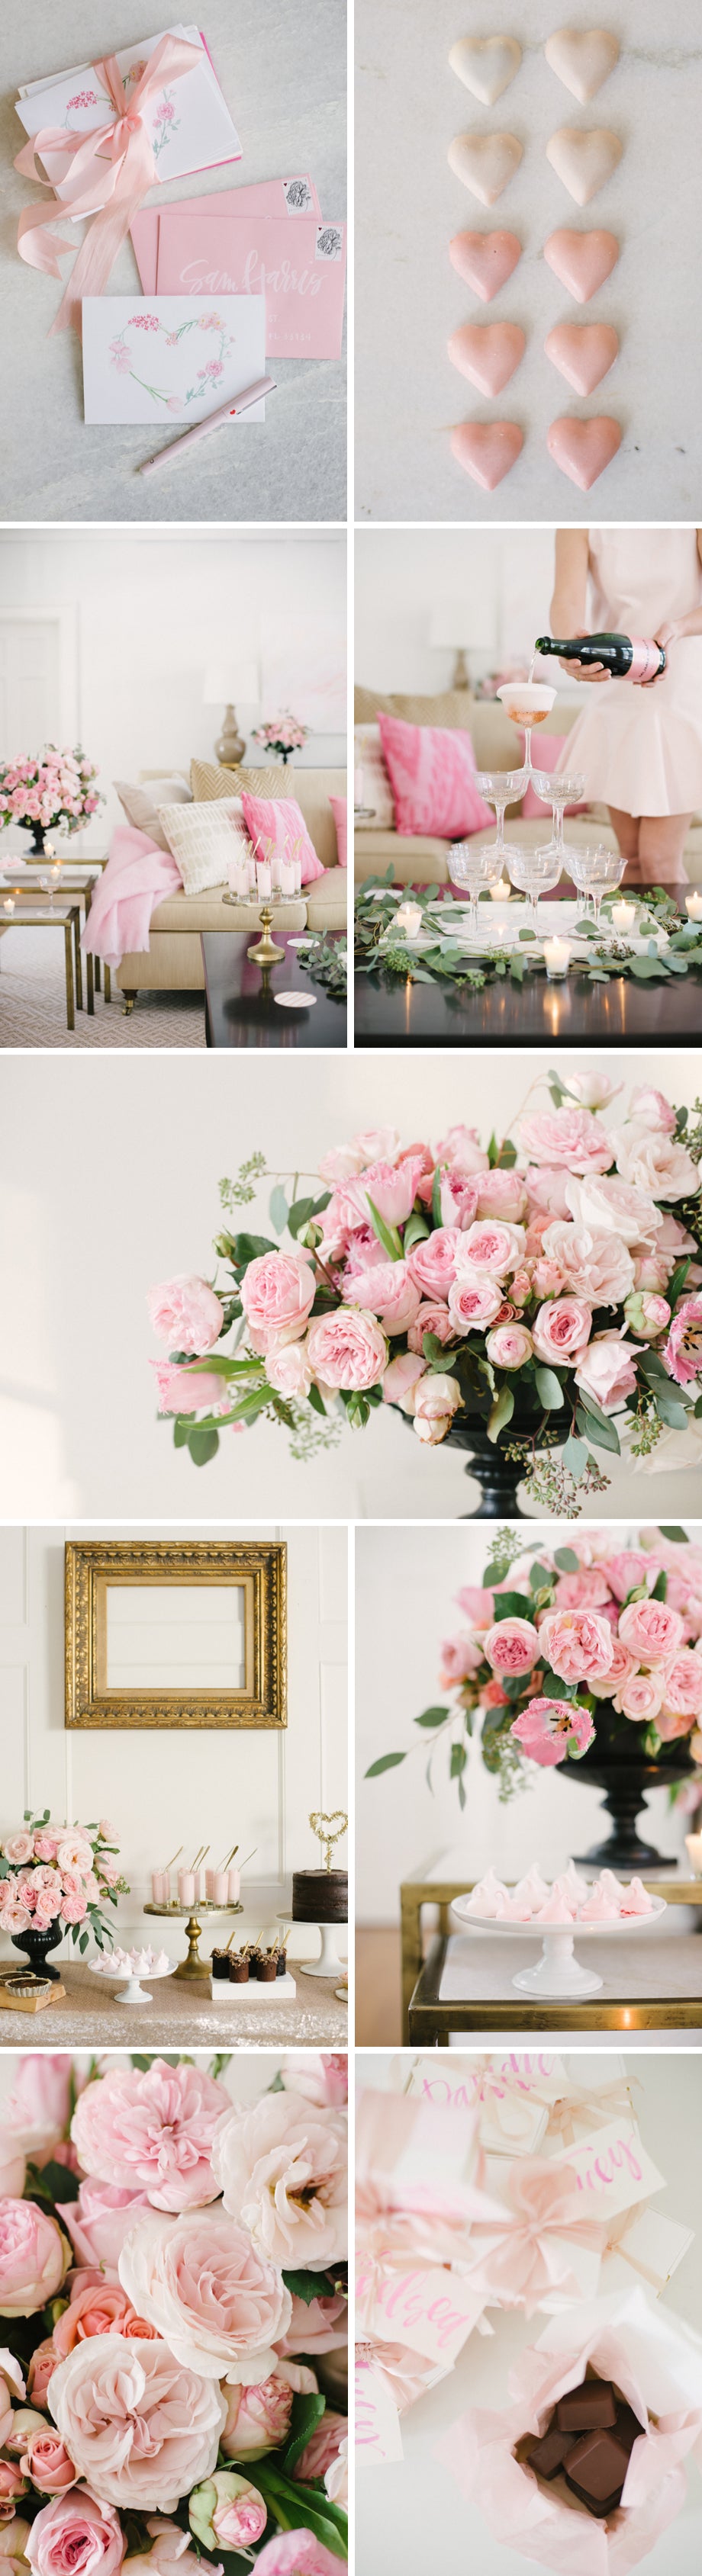 A collage of pink Valentine's Day party ideas including food, flowers, and decorations